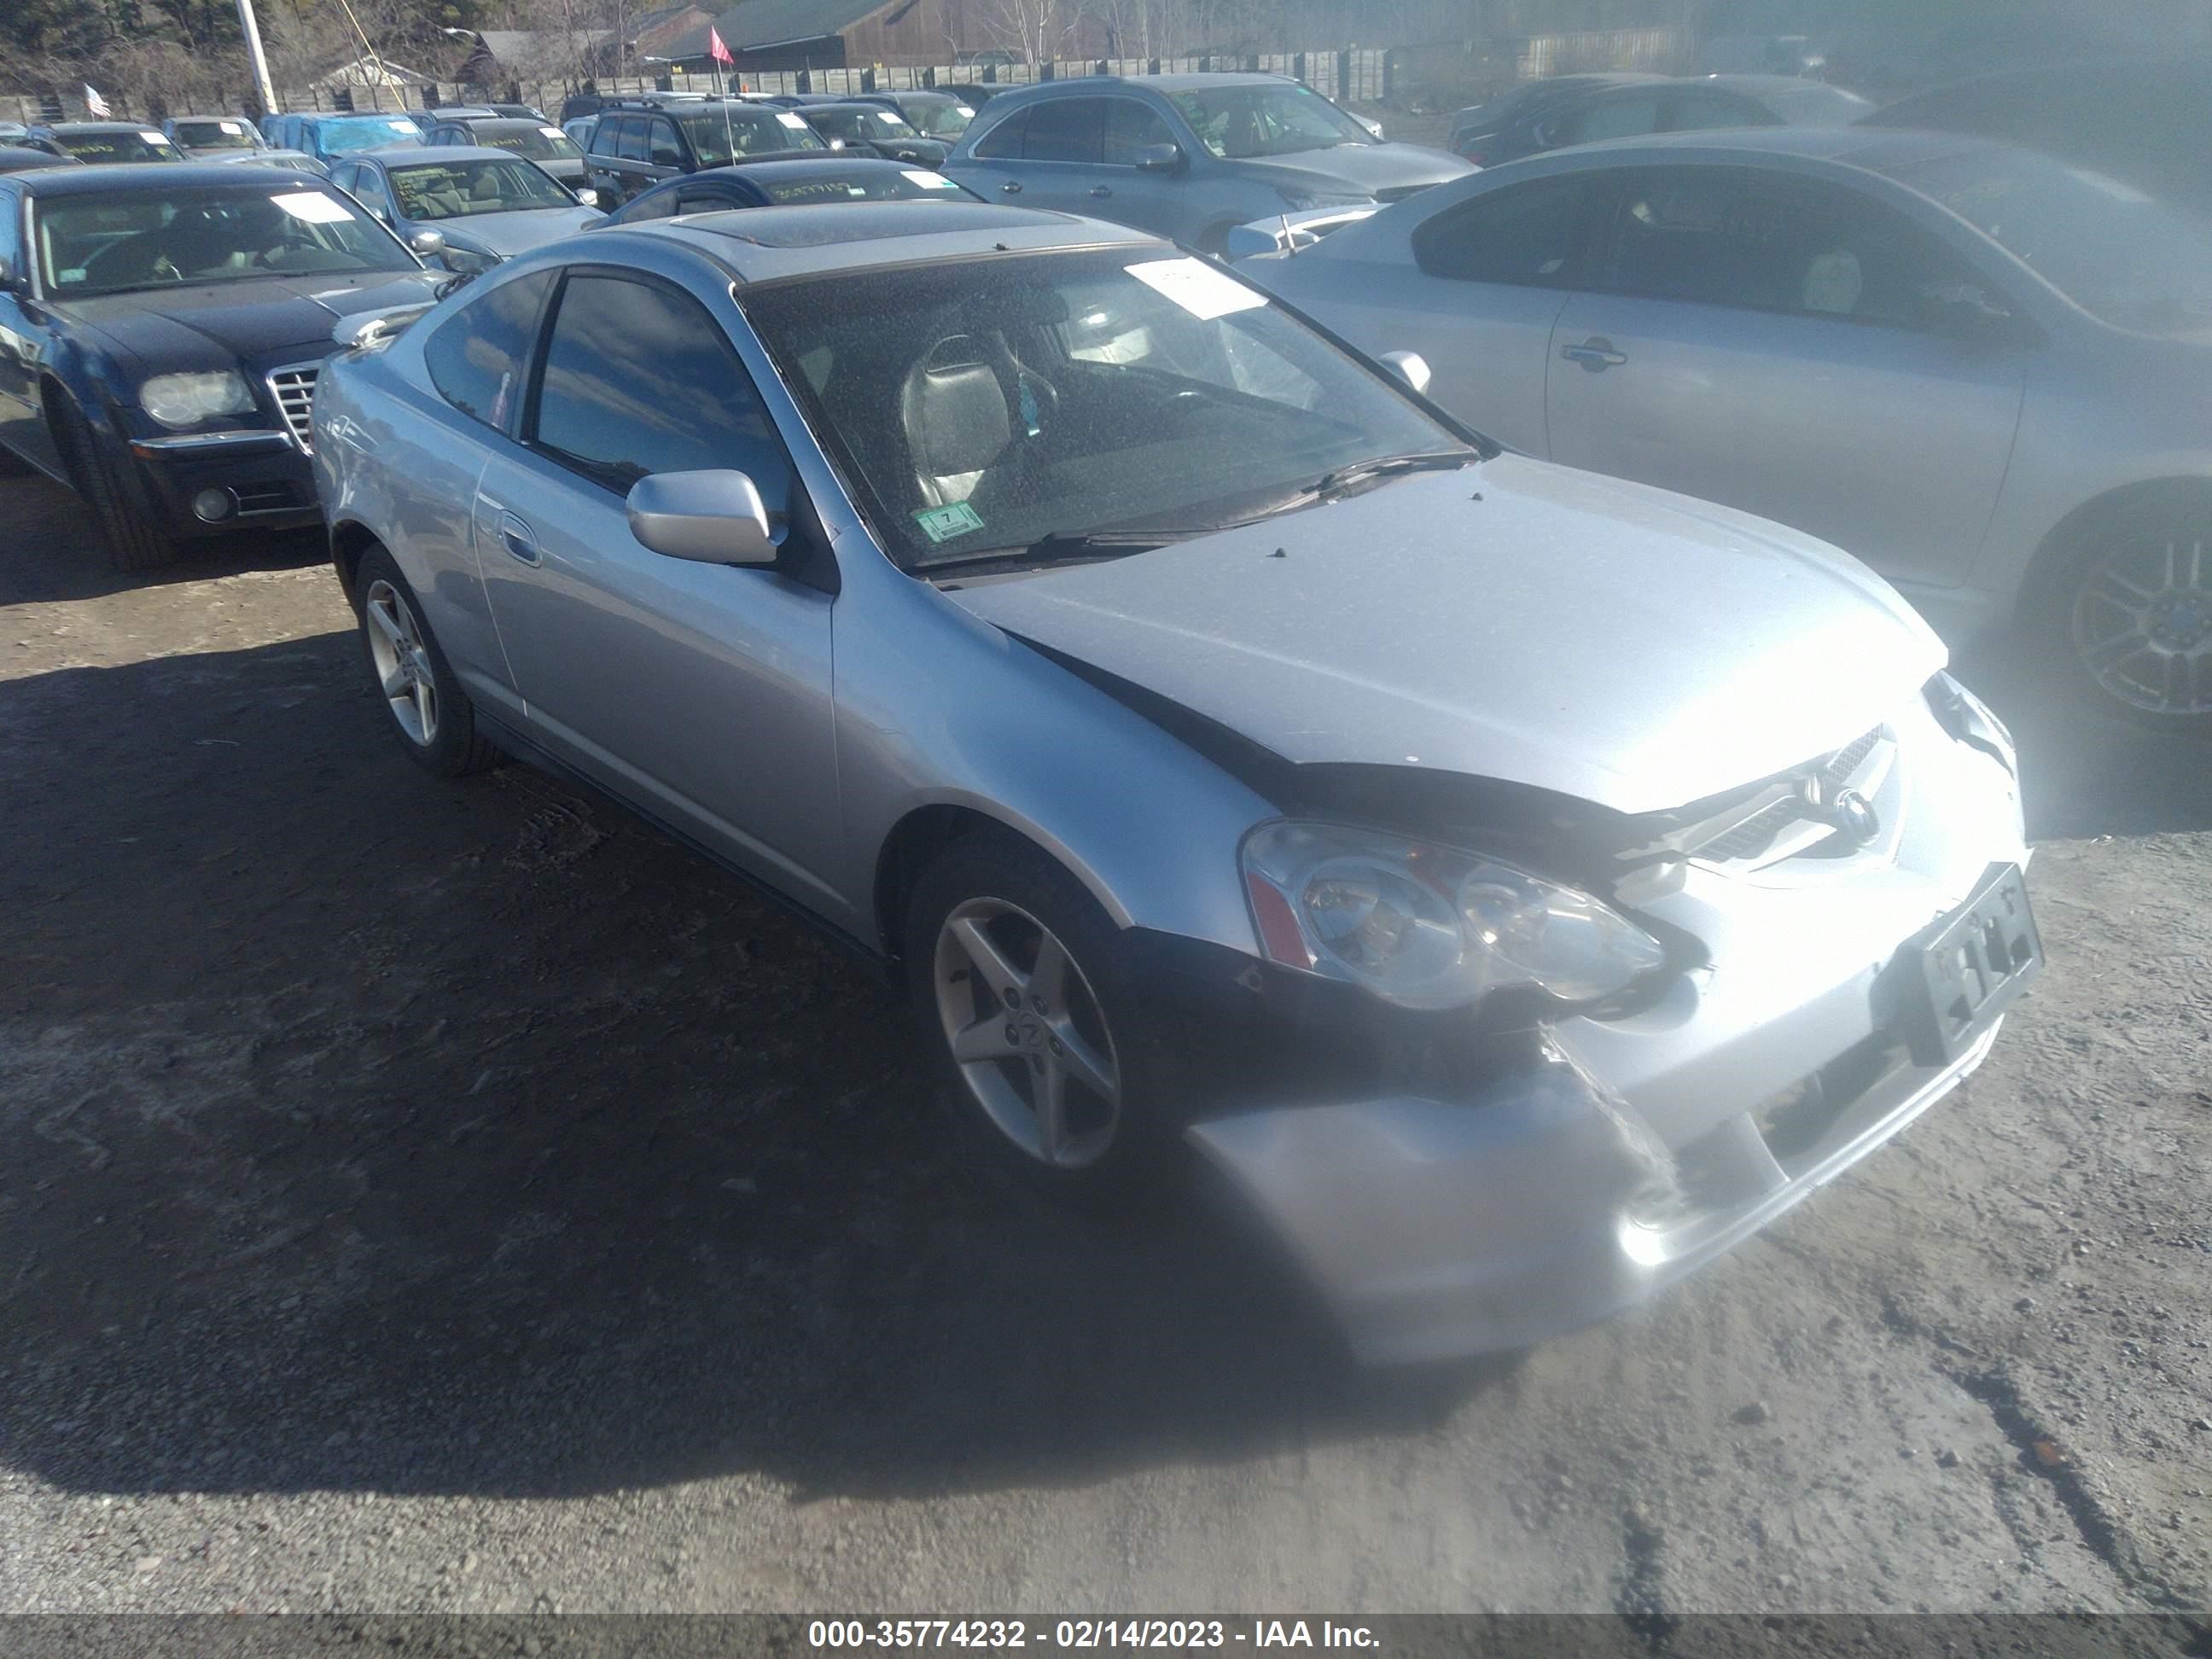 vin: JH4DC54864S009526 JH4DC54864S009526 2004 acura rsx 2000 for Sale in 01464, 2 Going Rd, Shirley, Massachusetts, USA